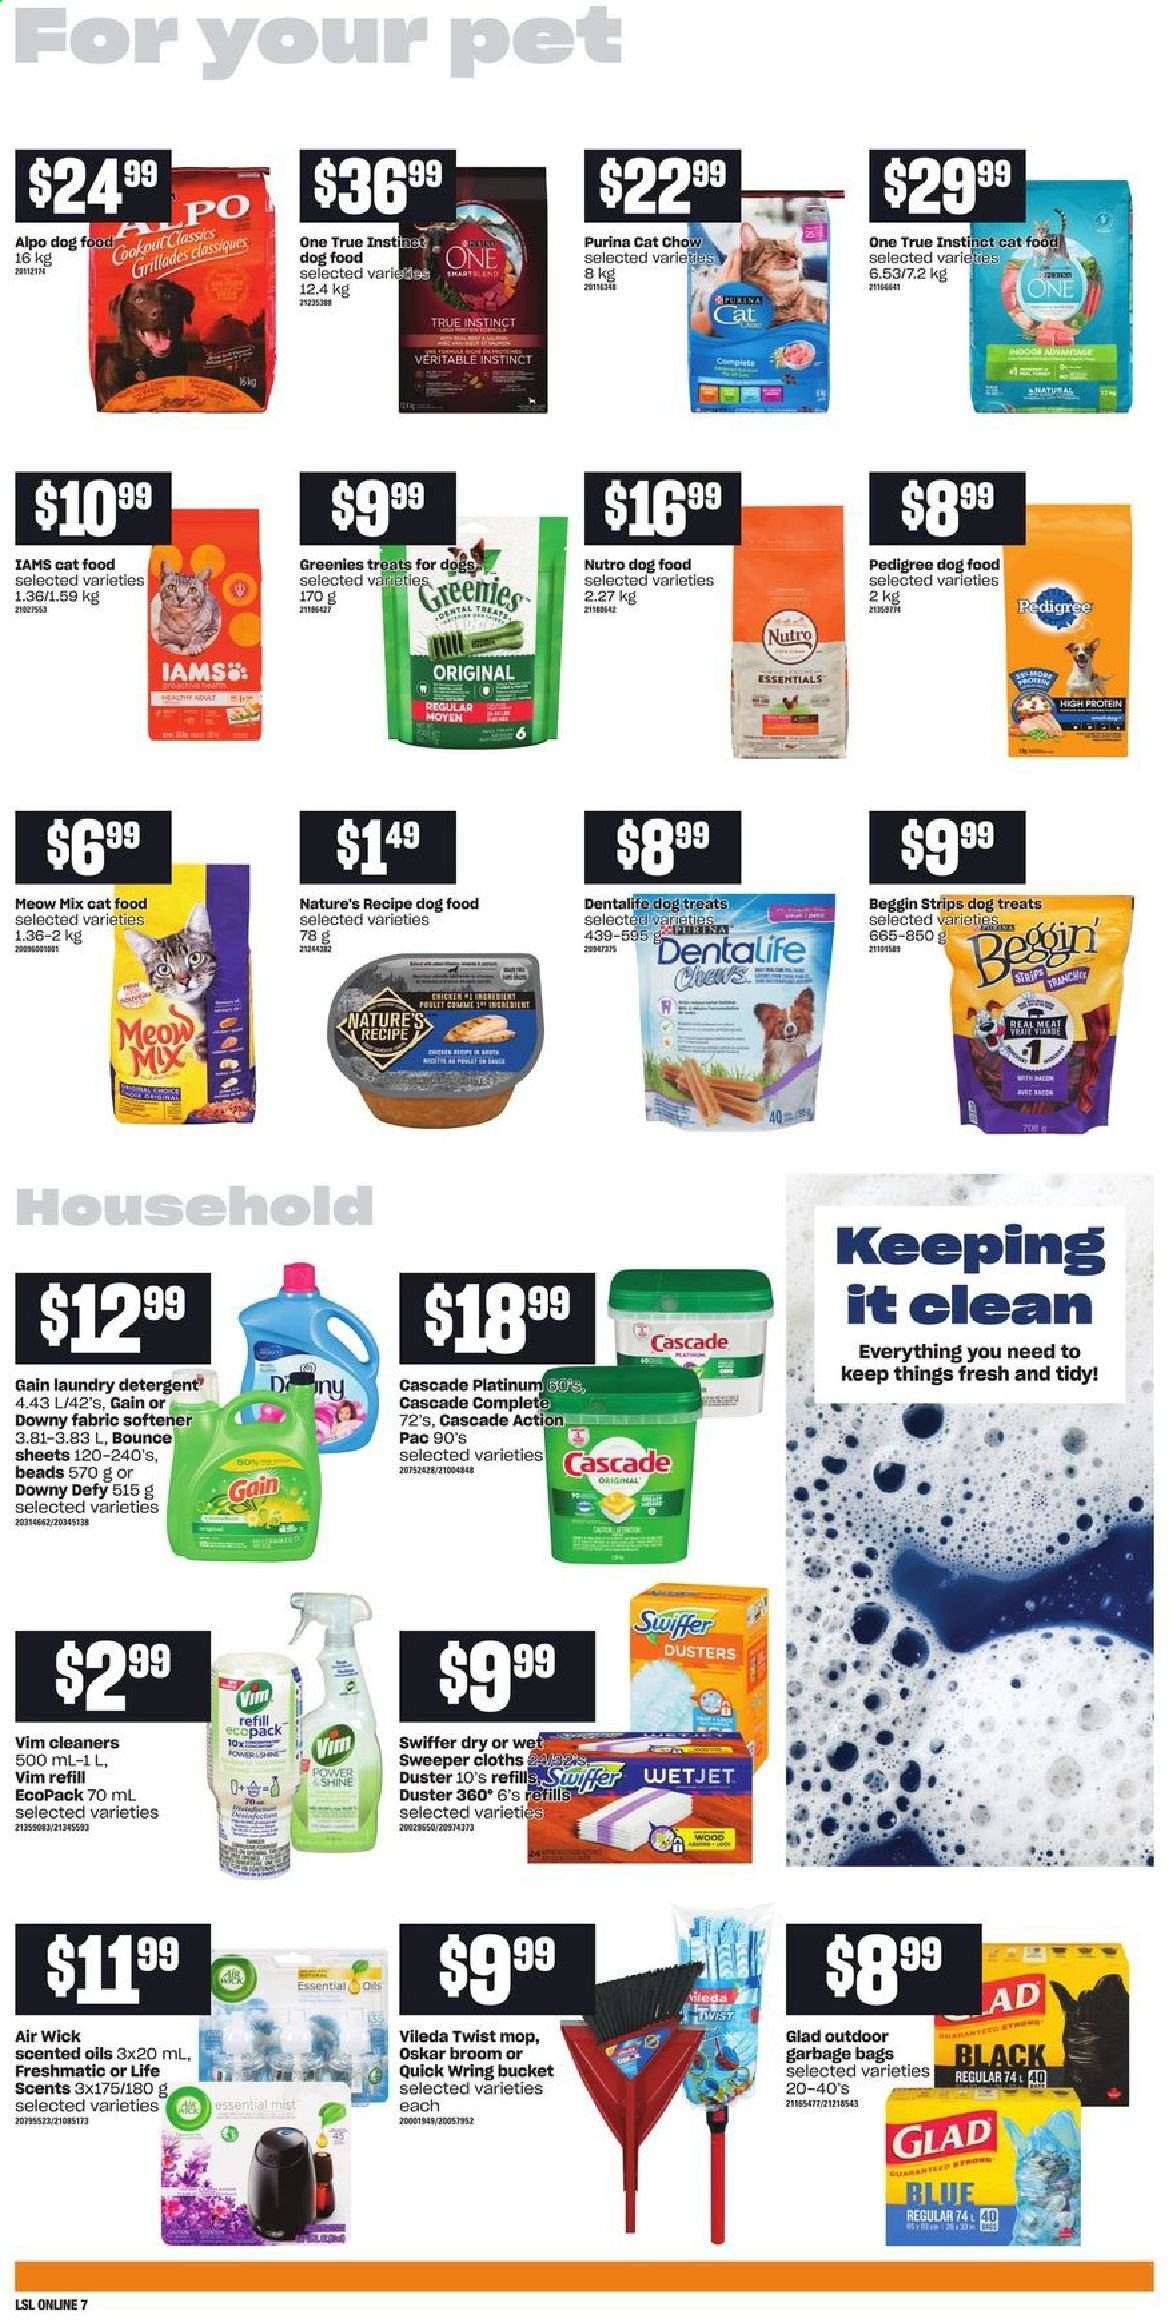 thumbnail - Loblaws Flyer - June 30, 2021 - July 07, 2021 - Sales products - strips, Gain, Swiffer, fabric softener, laundry detergent, Bounce, Cascade, Downy Laundry, bag, Greenies, animal food, cat food, dog food, Purina, Pedigree, Dentalife, Meow Mix, Alpo, Iams. Page 11.